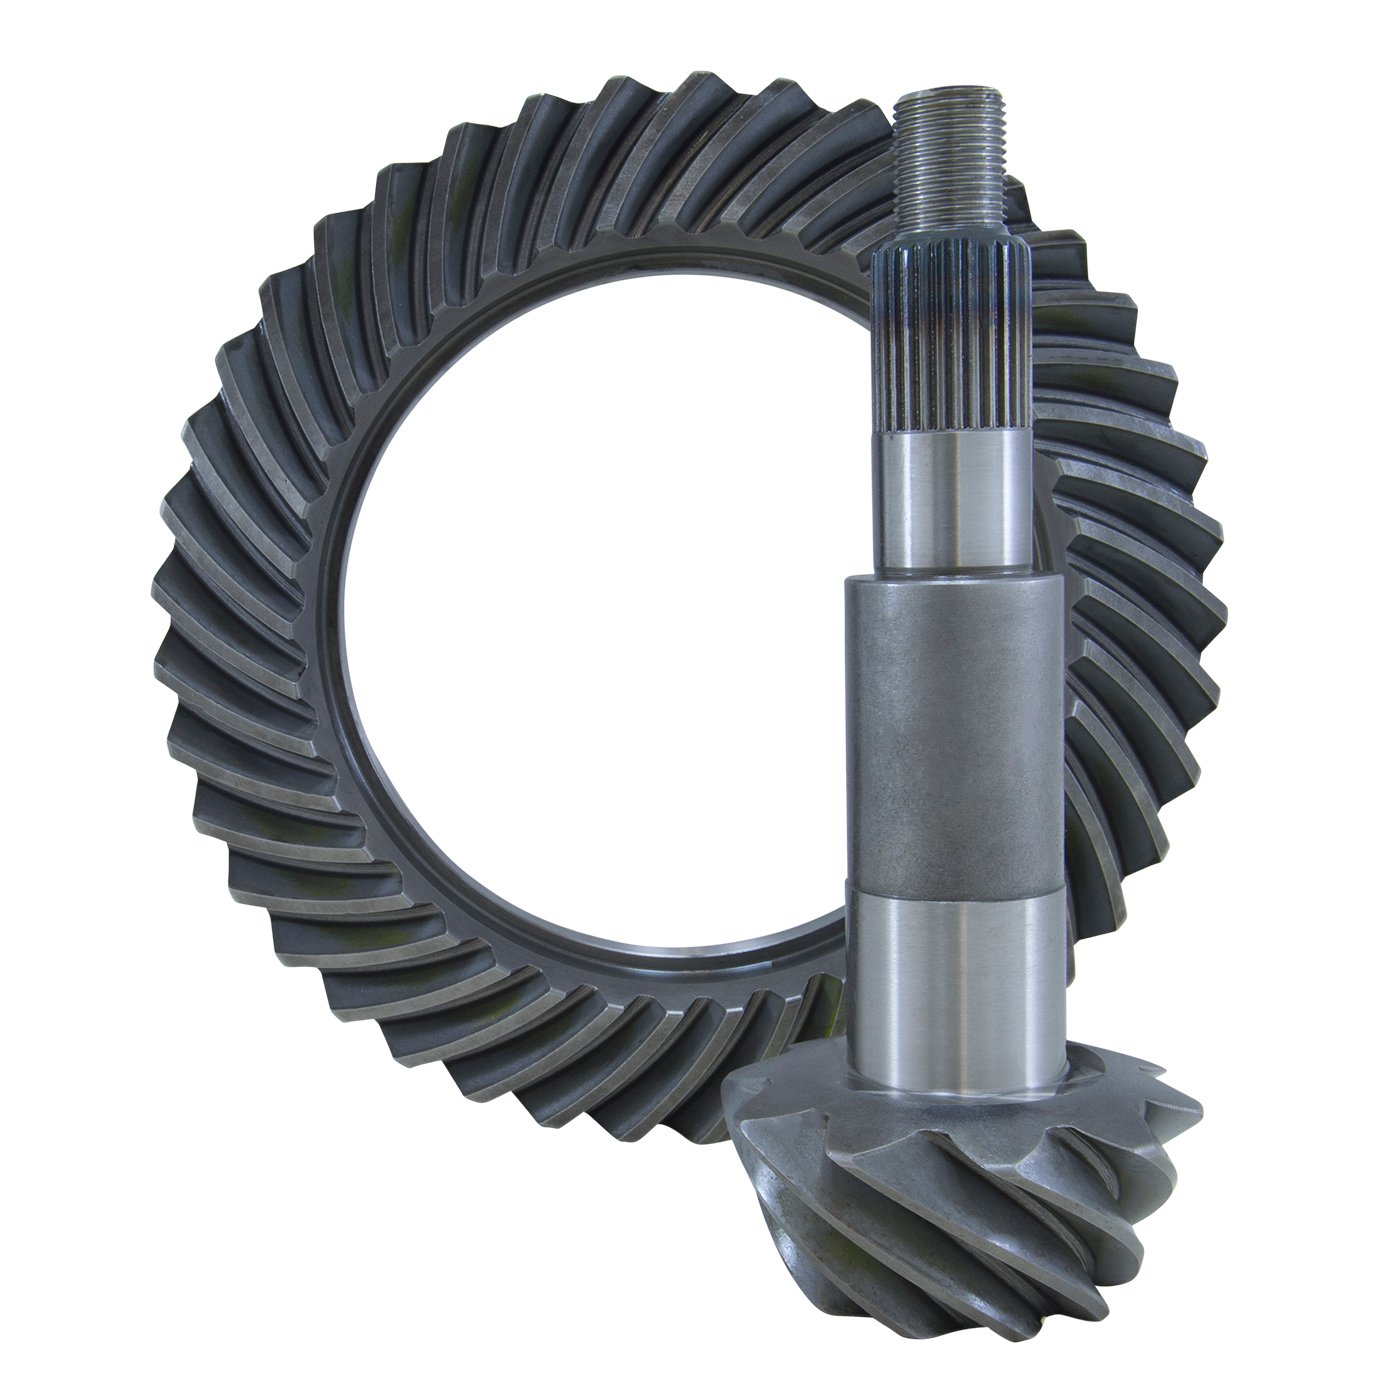 USA Standard ZG D70-373 Replacement Ring & Pinion Gear Set, For Dana 70, 3.73 Ratio